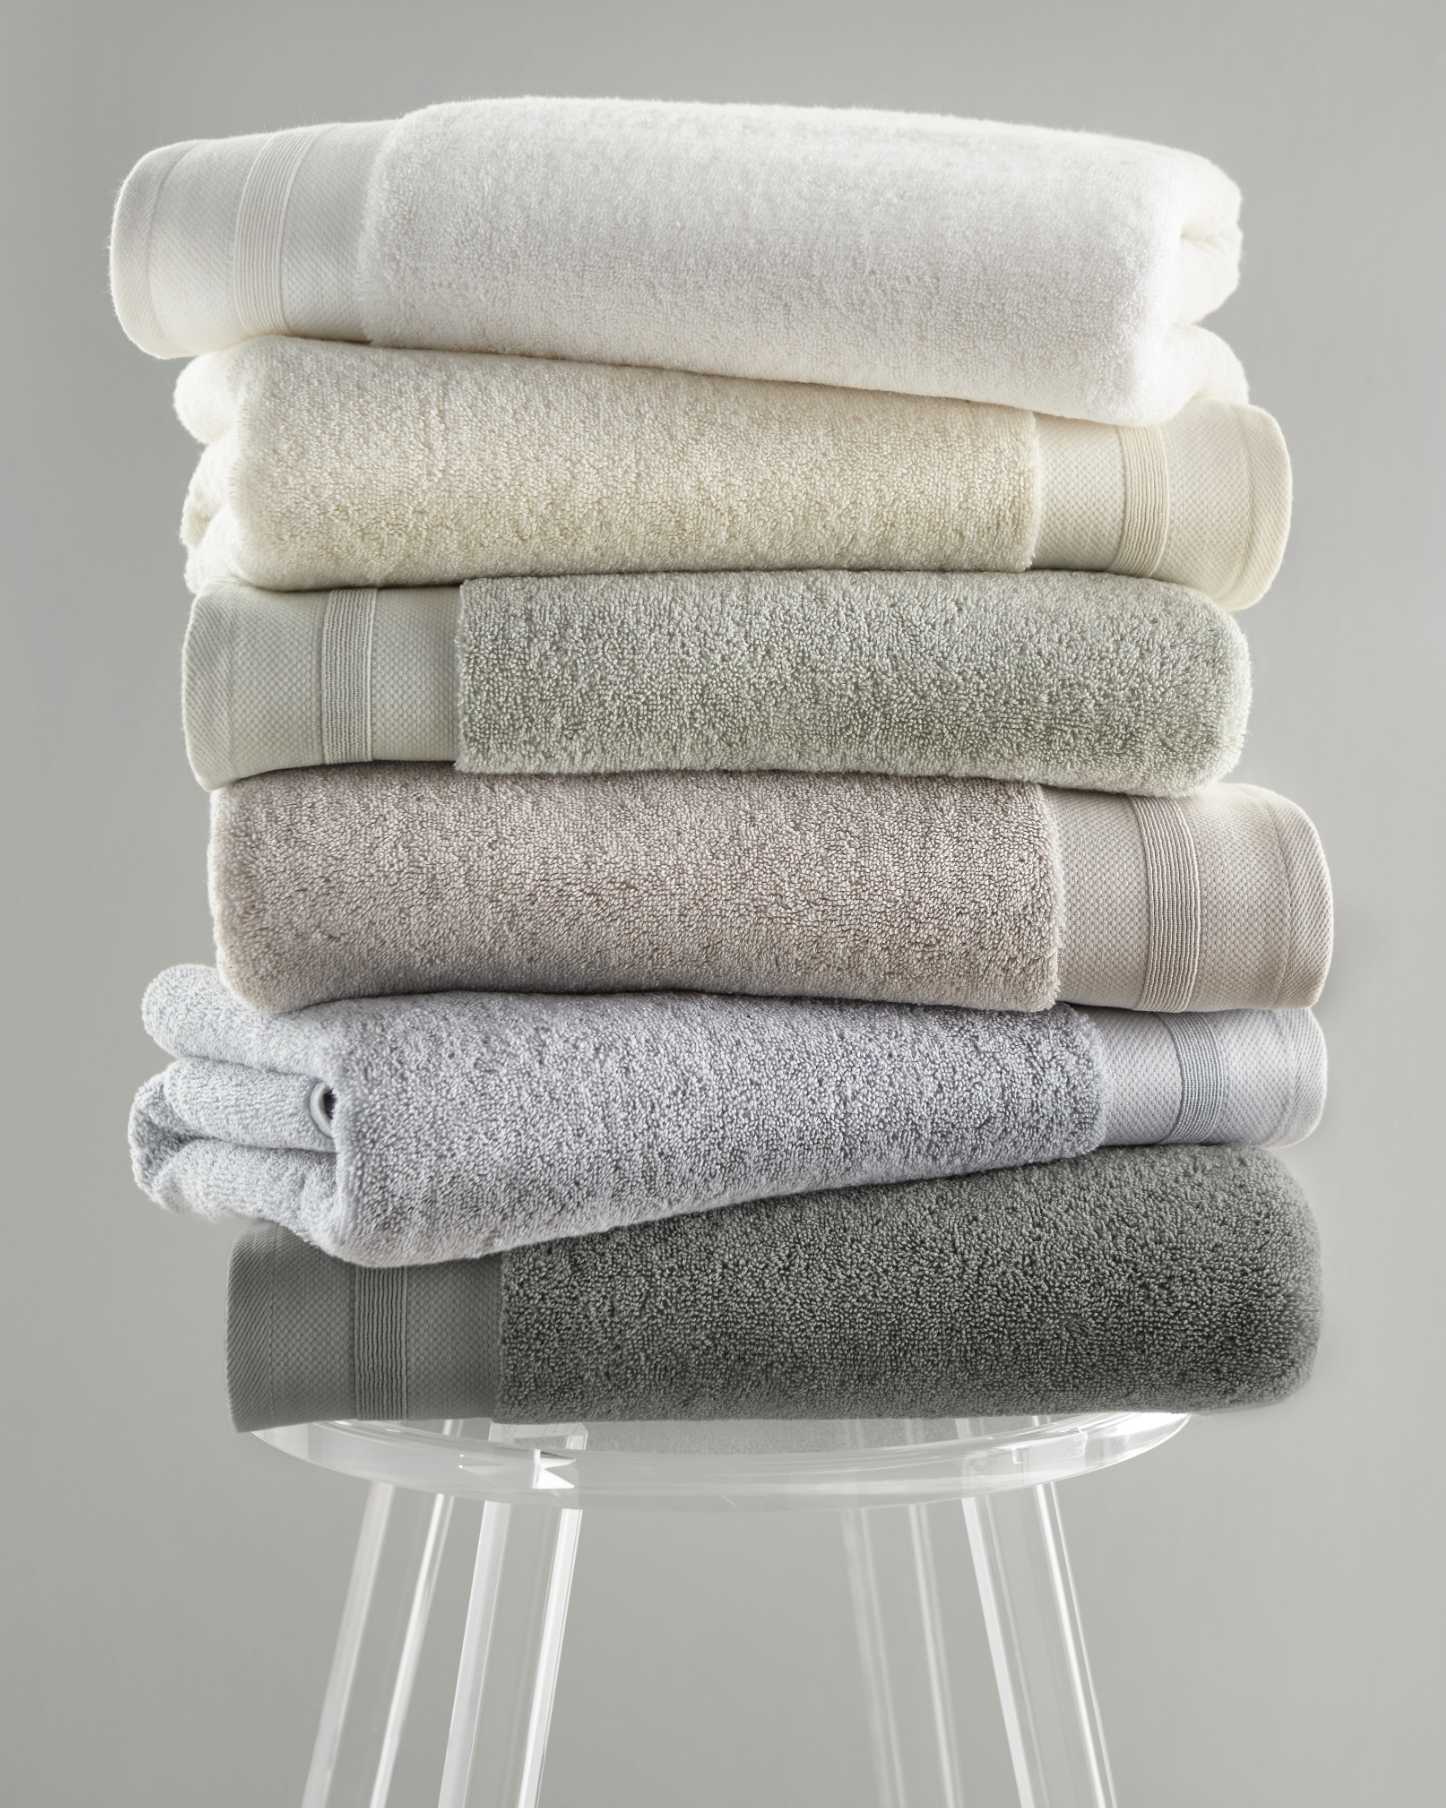 How To Keep Towels Soft & Fluffy